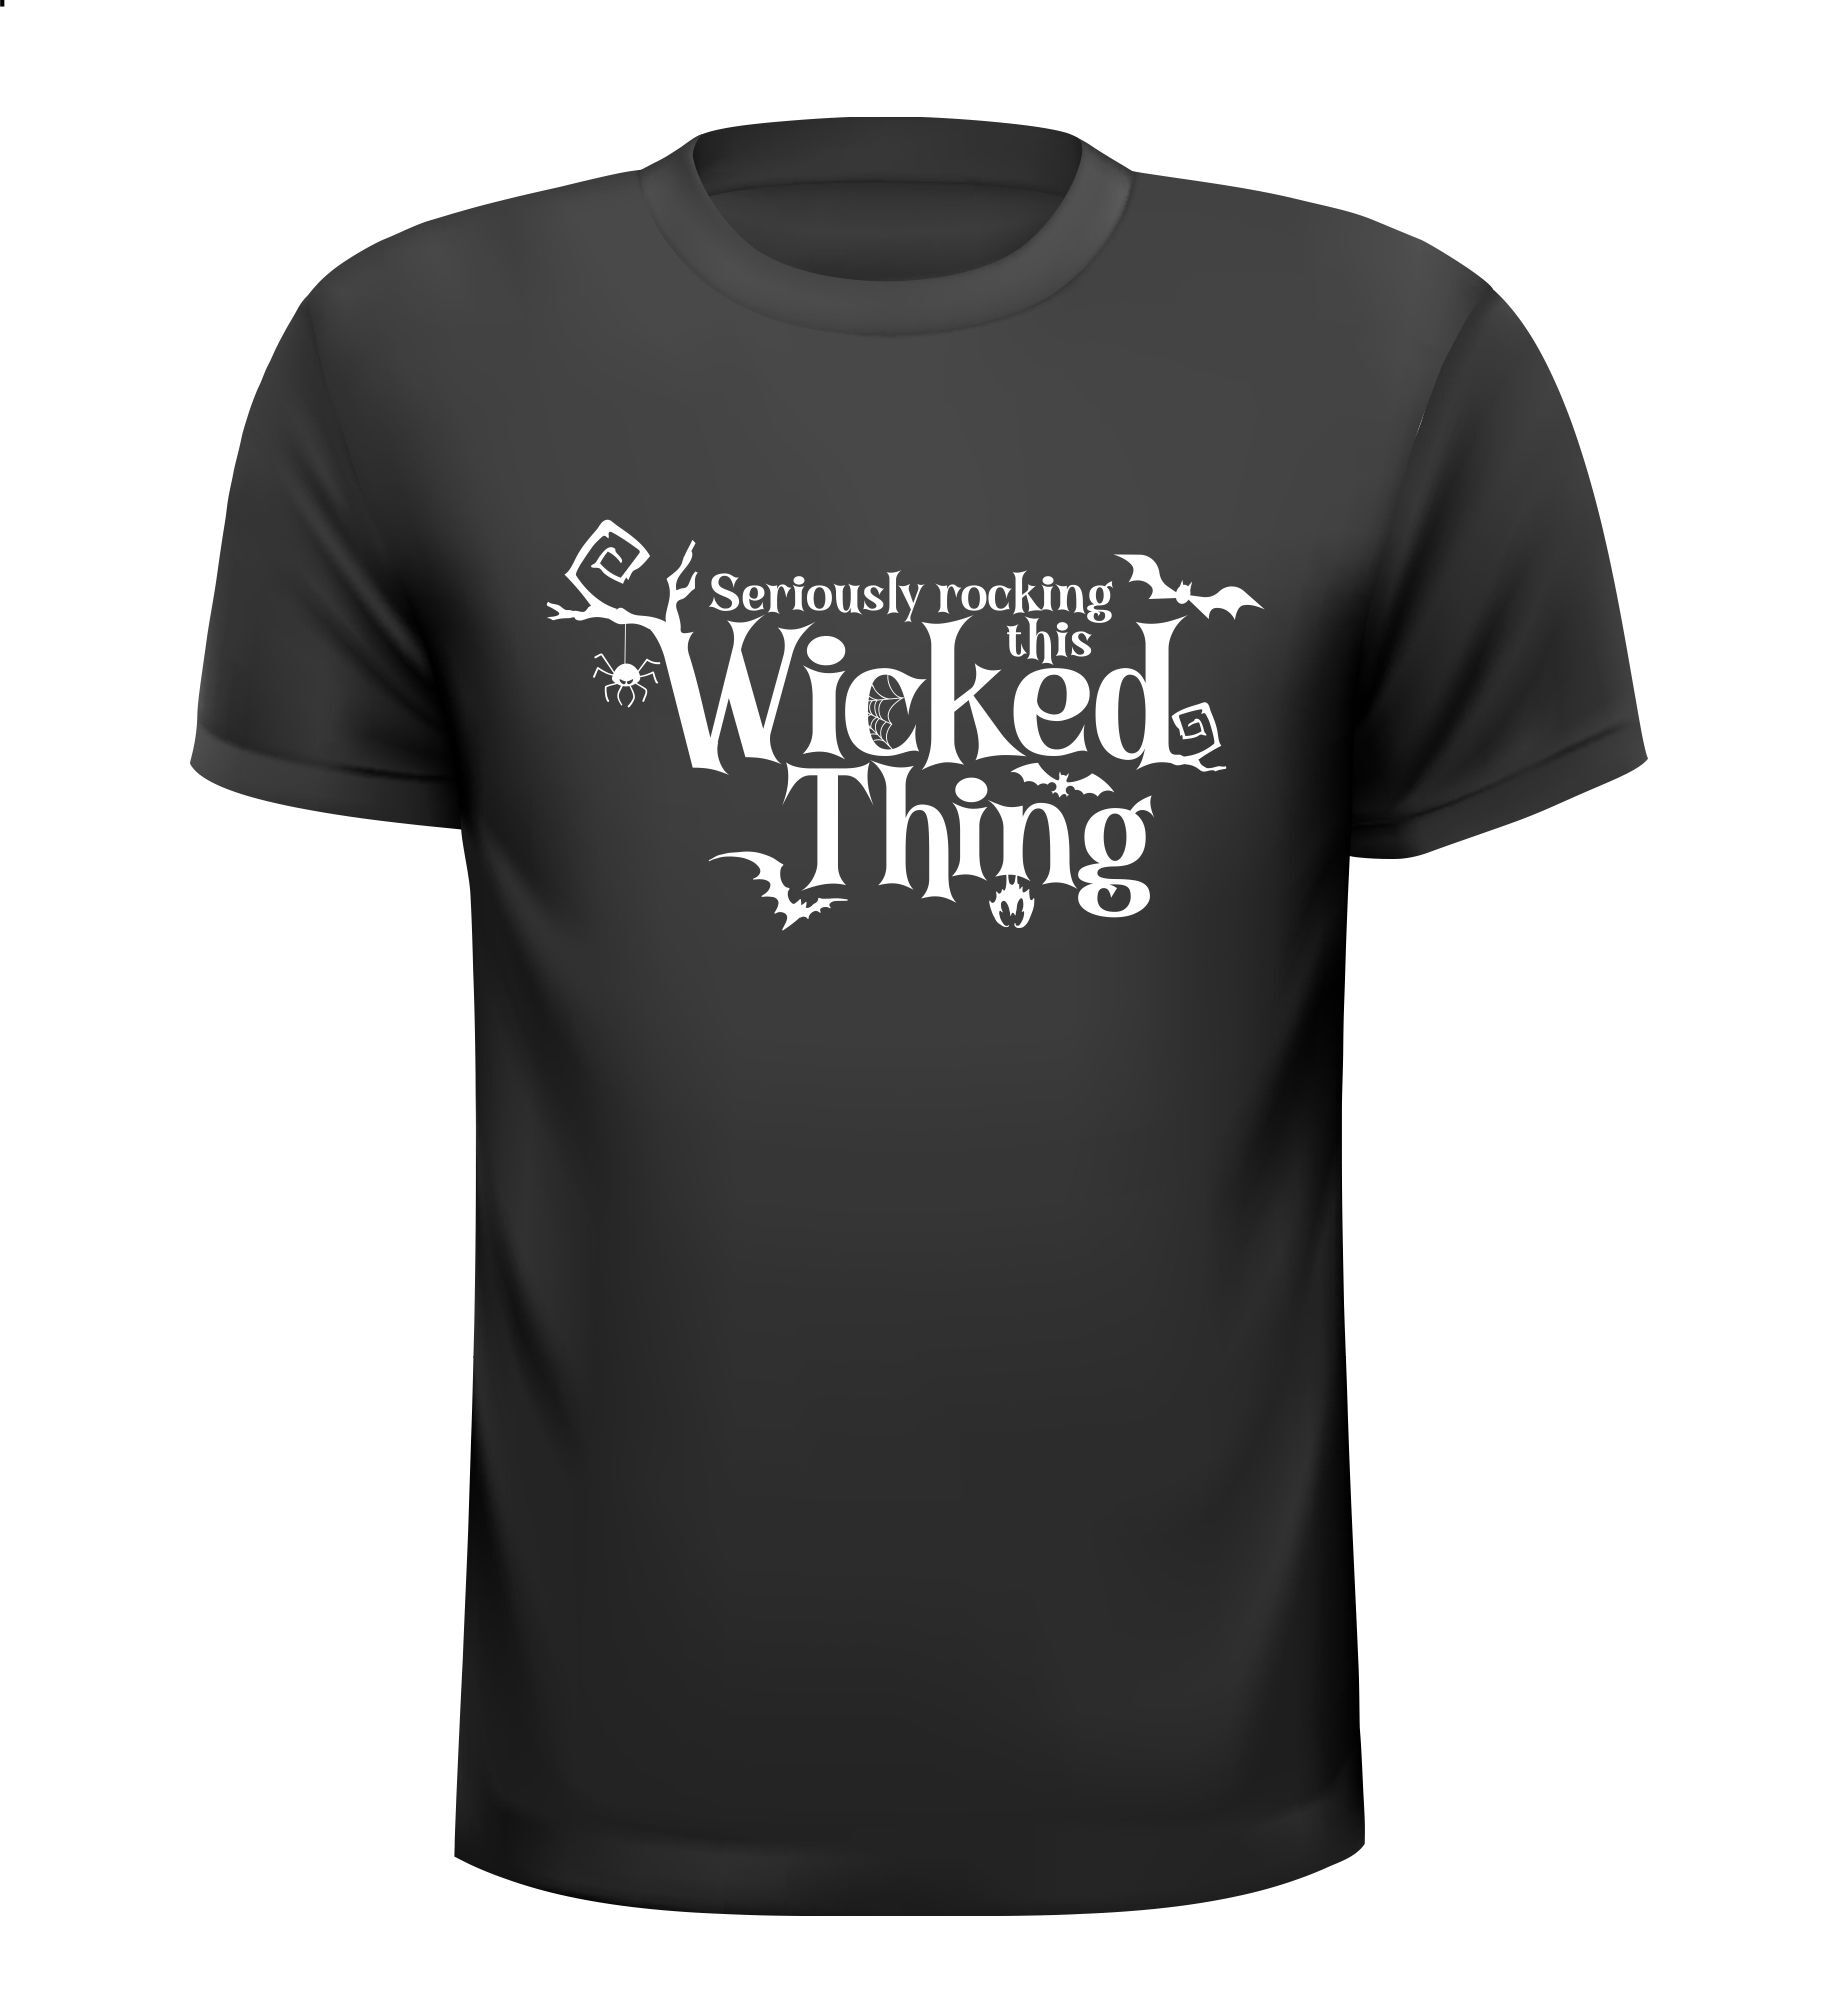 T-shirt seriously rocking this wicked thing halloween